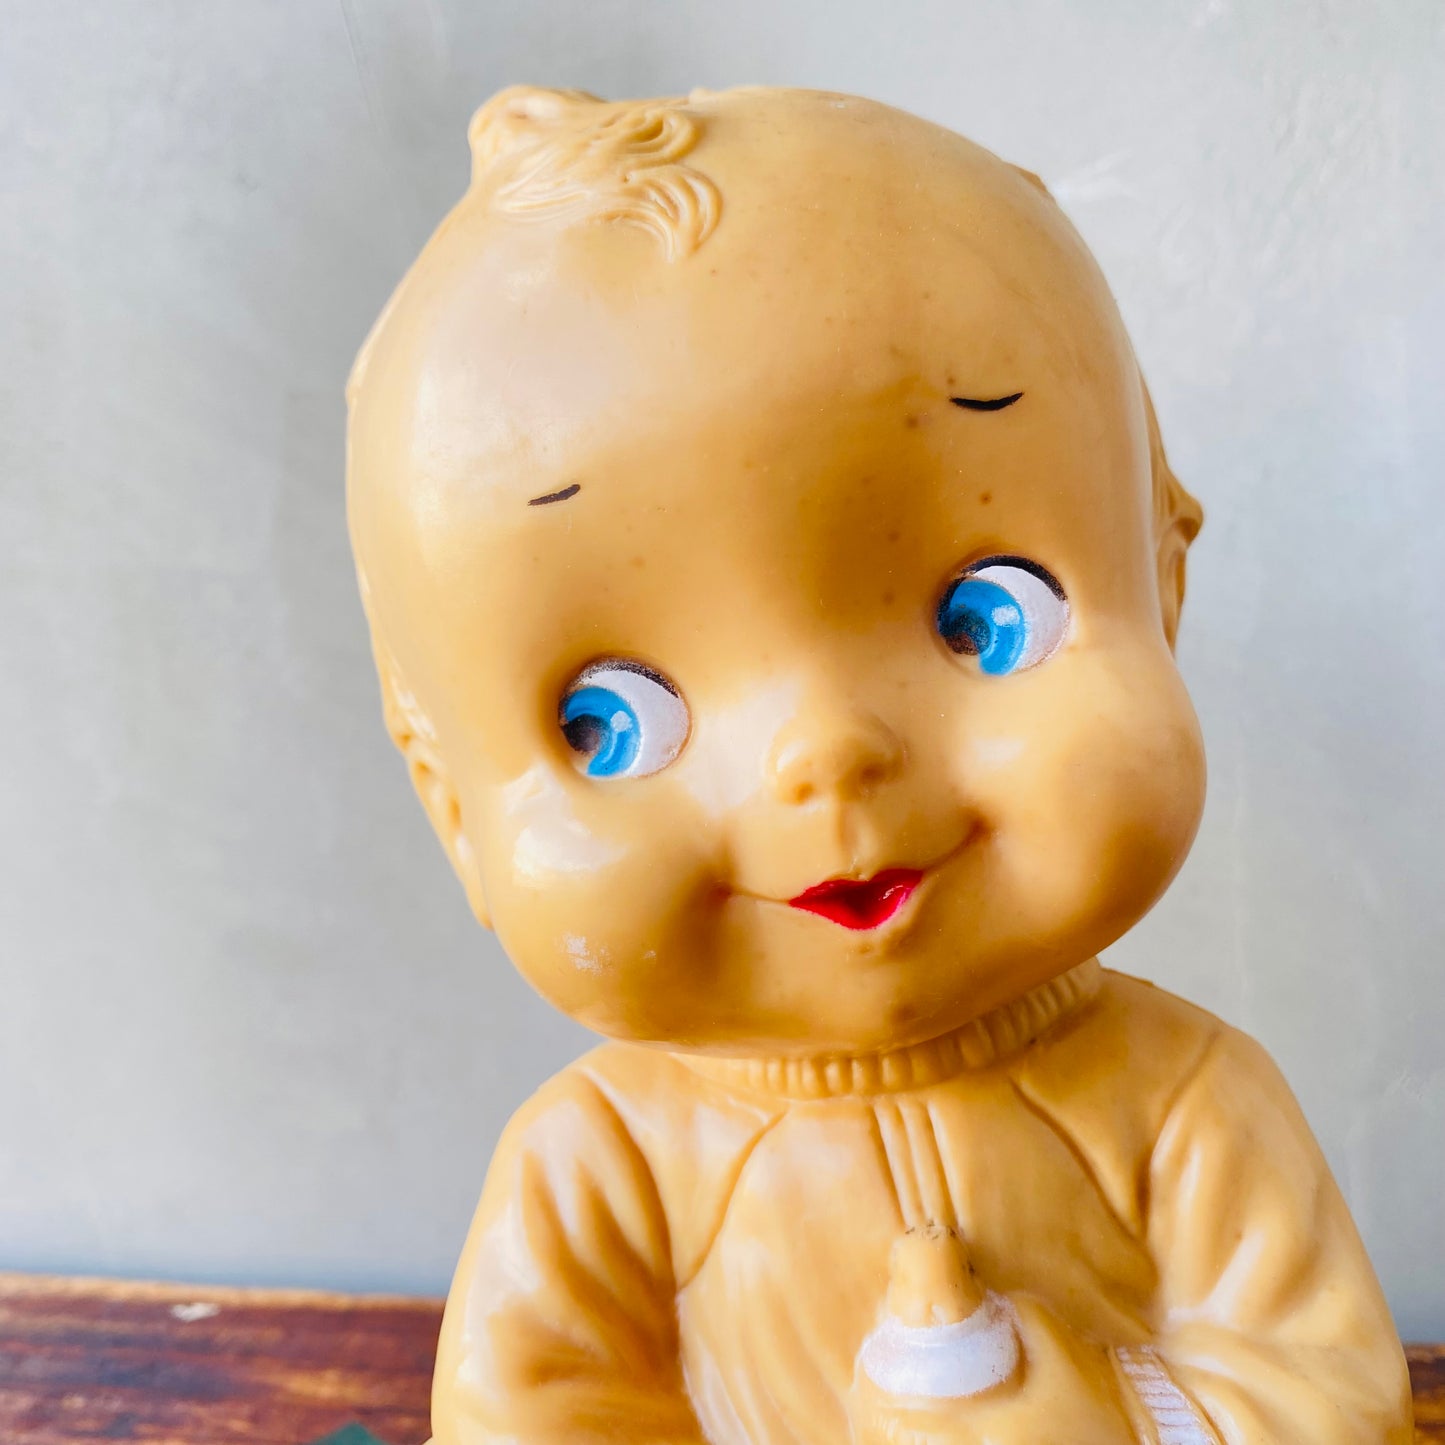 【1920s-1940s USA】baby doll